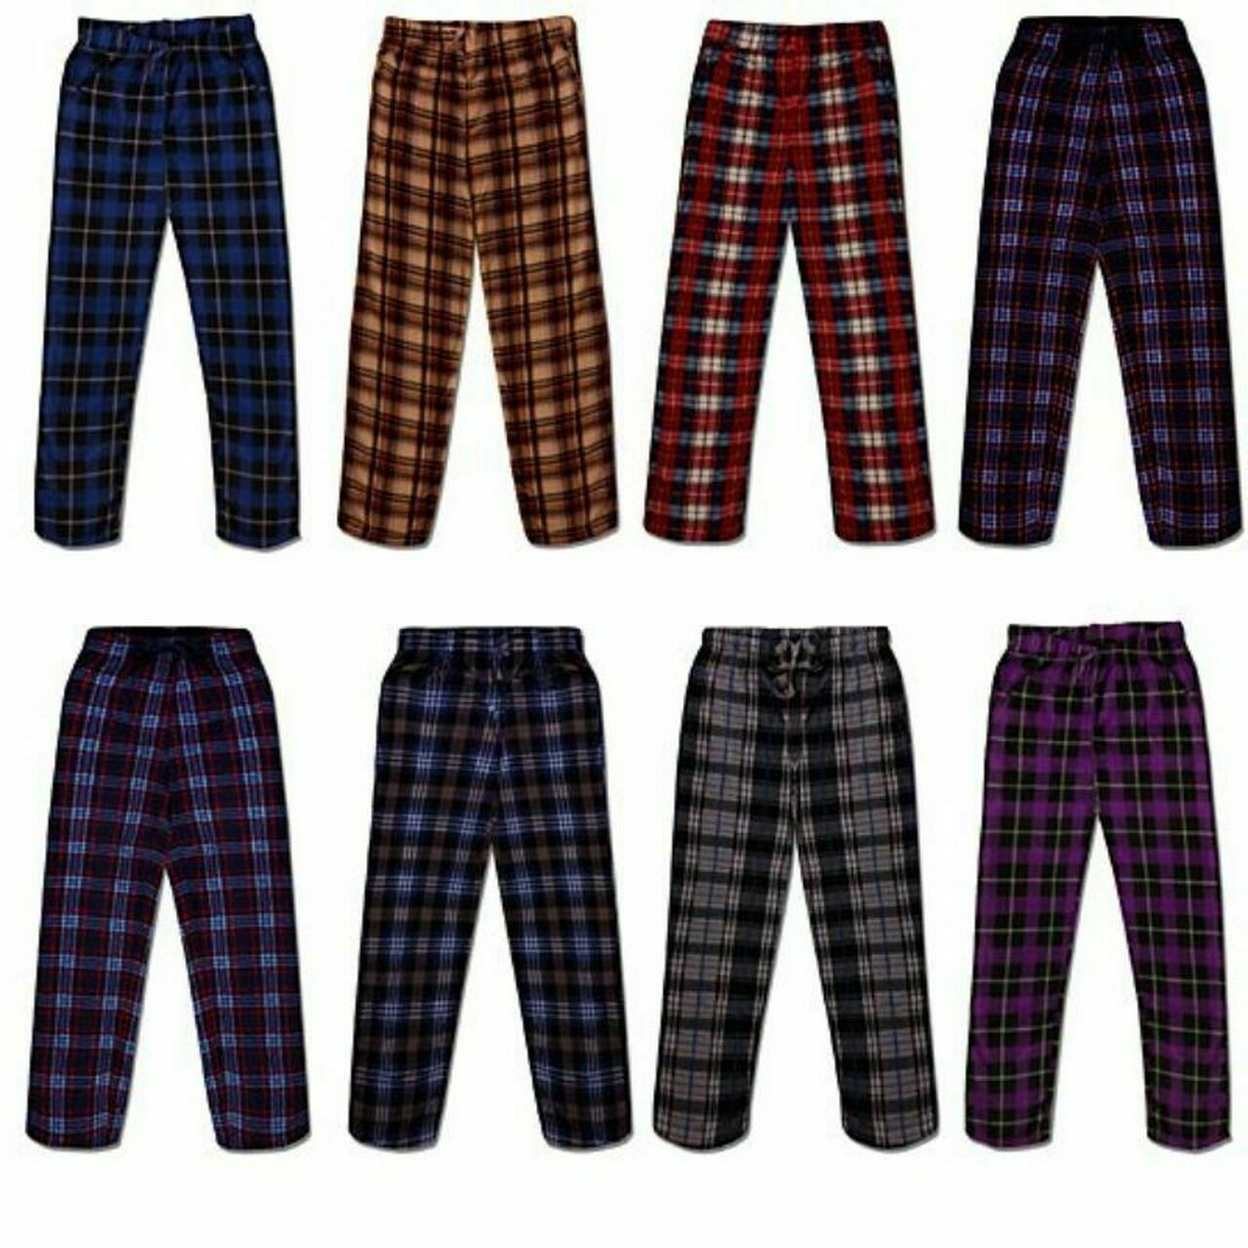 2-Pack: Men's Ultra Soft Cozy Flannel Fleece Plaid Pajama Sleep Bottom Lounge Pants - Red & Red, Large